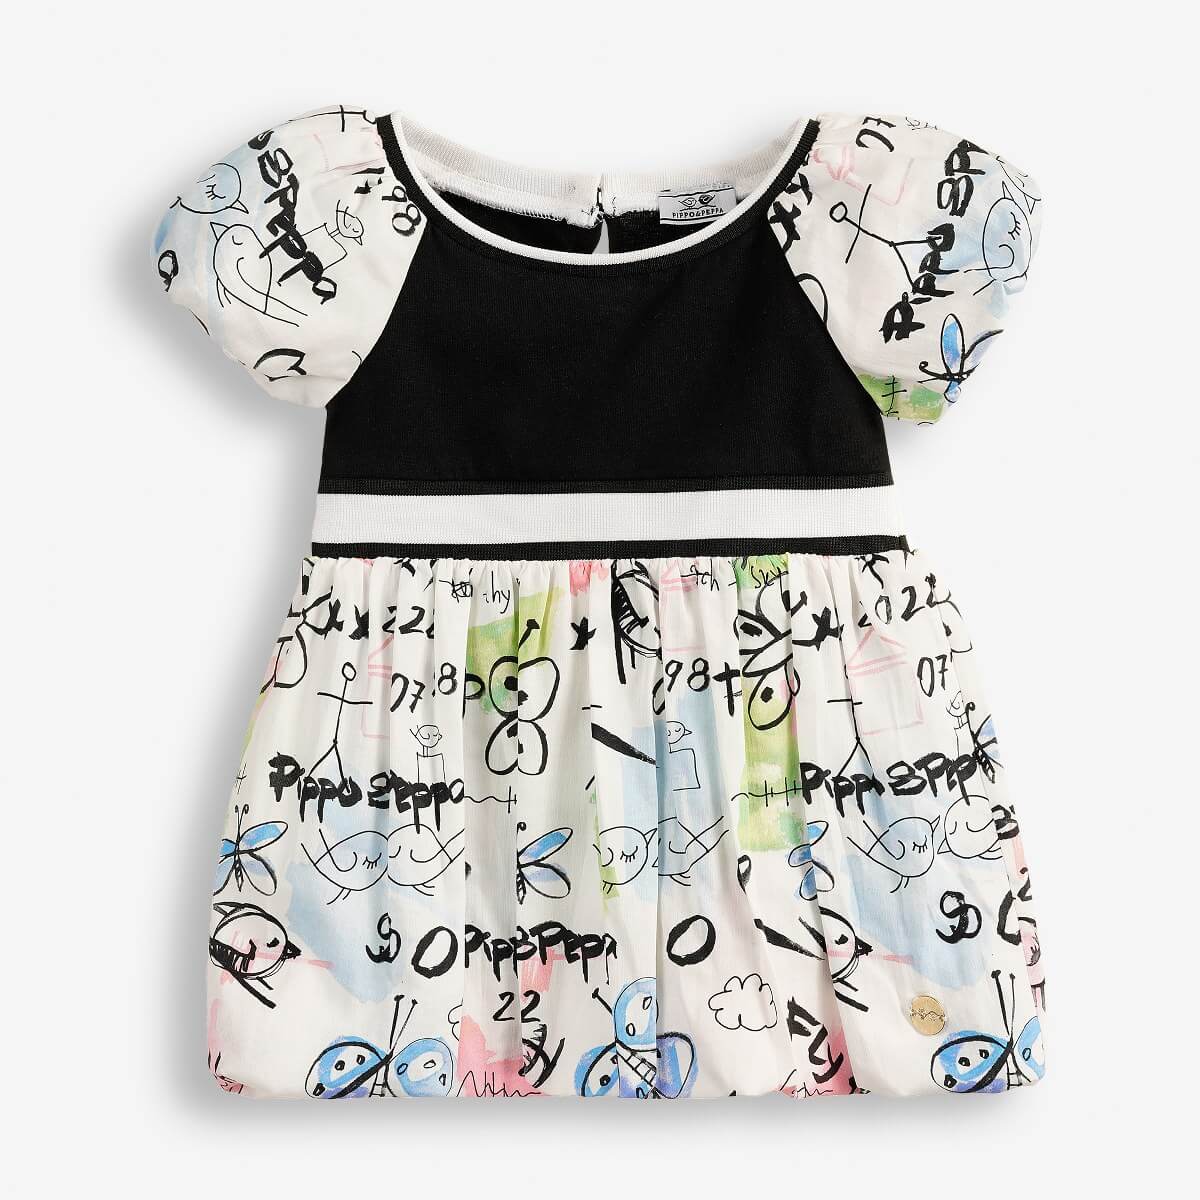 Baby Girl's Dress and an All-Over-Print